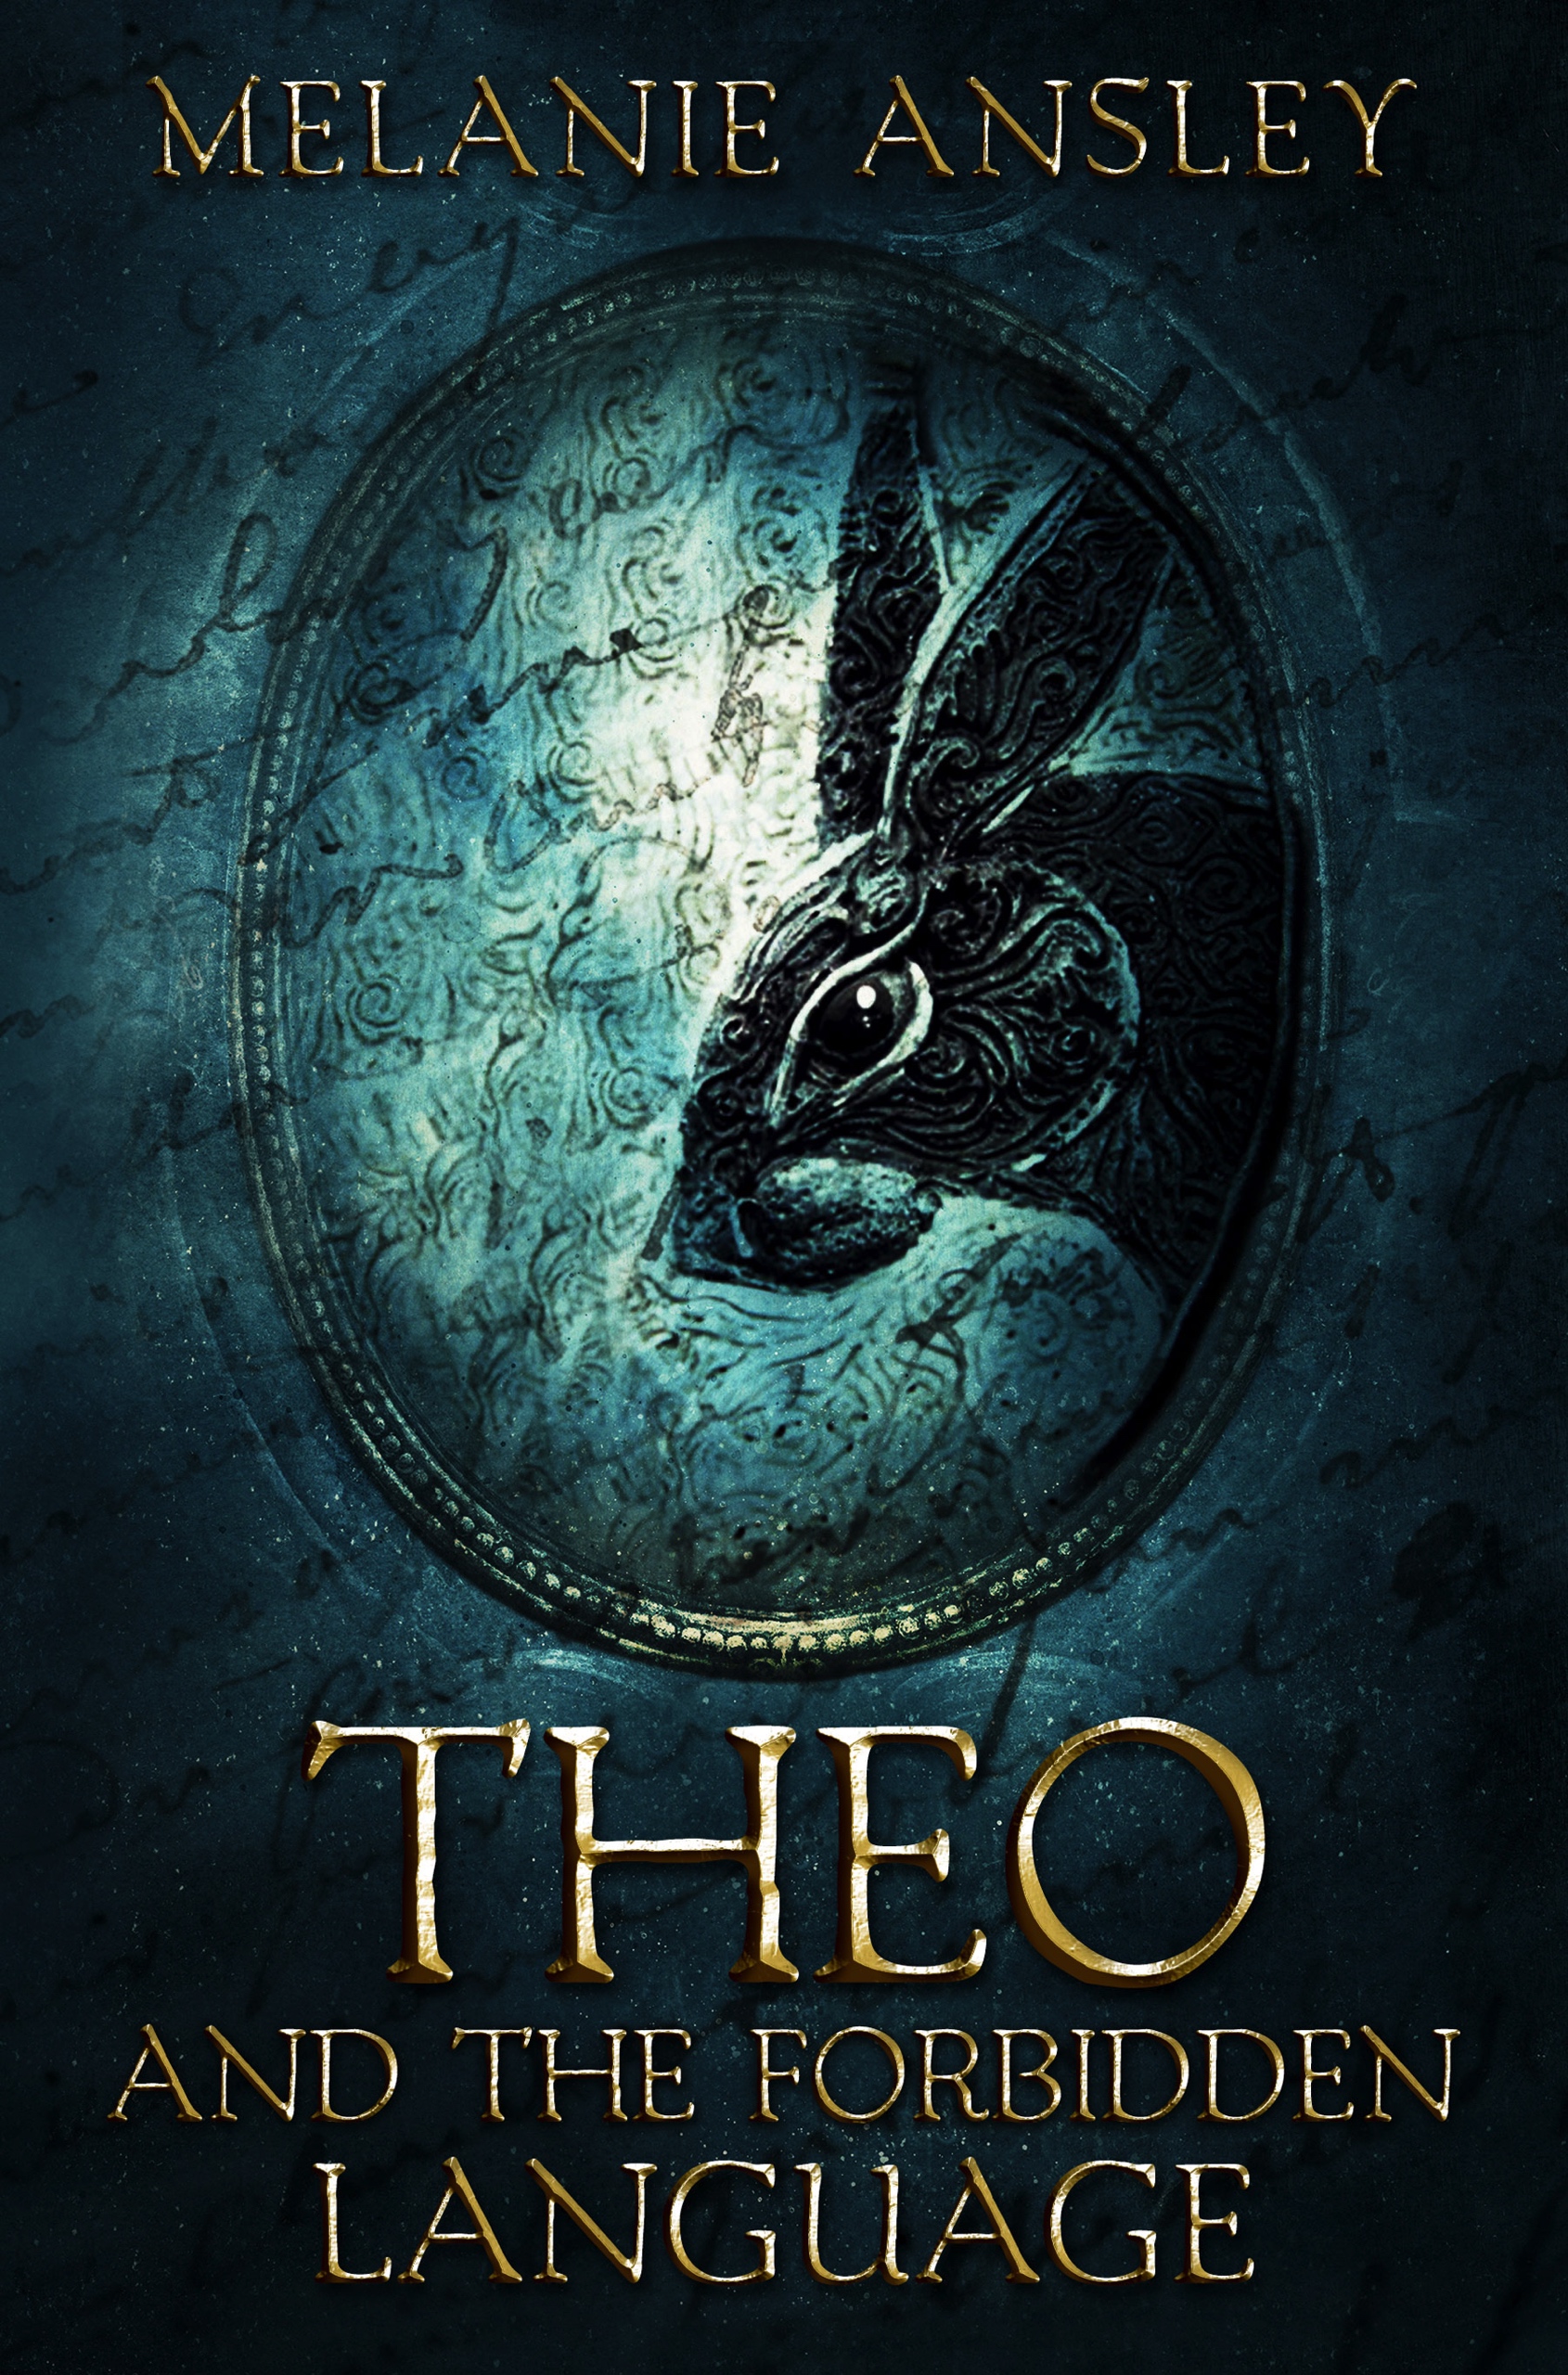 FREE: Theo and the Forbidden Language by Melanie Ansley